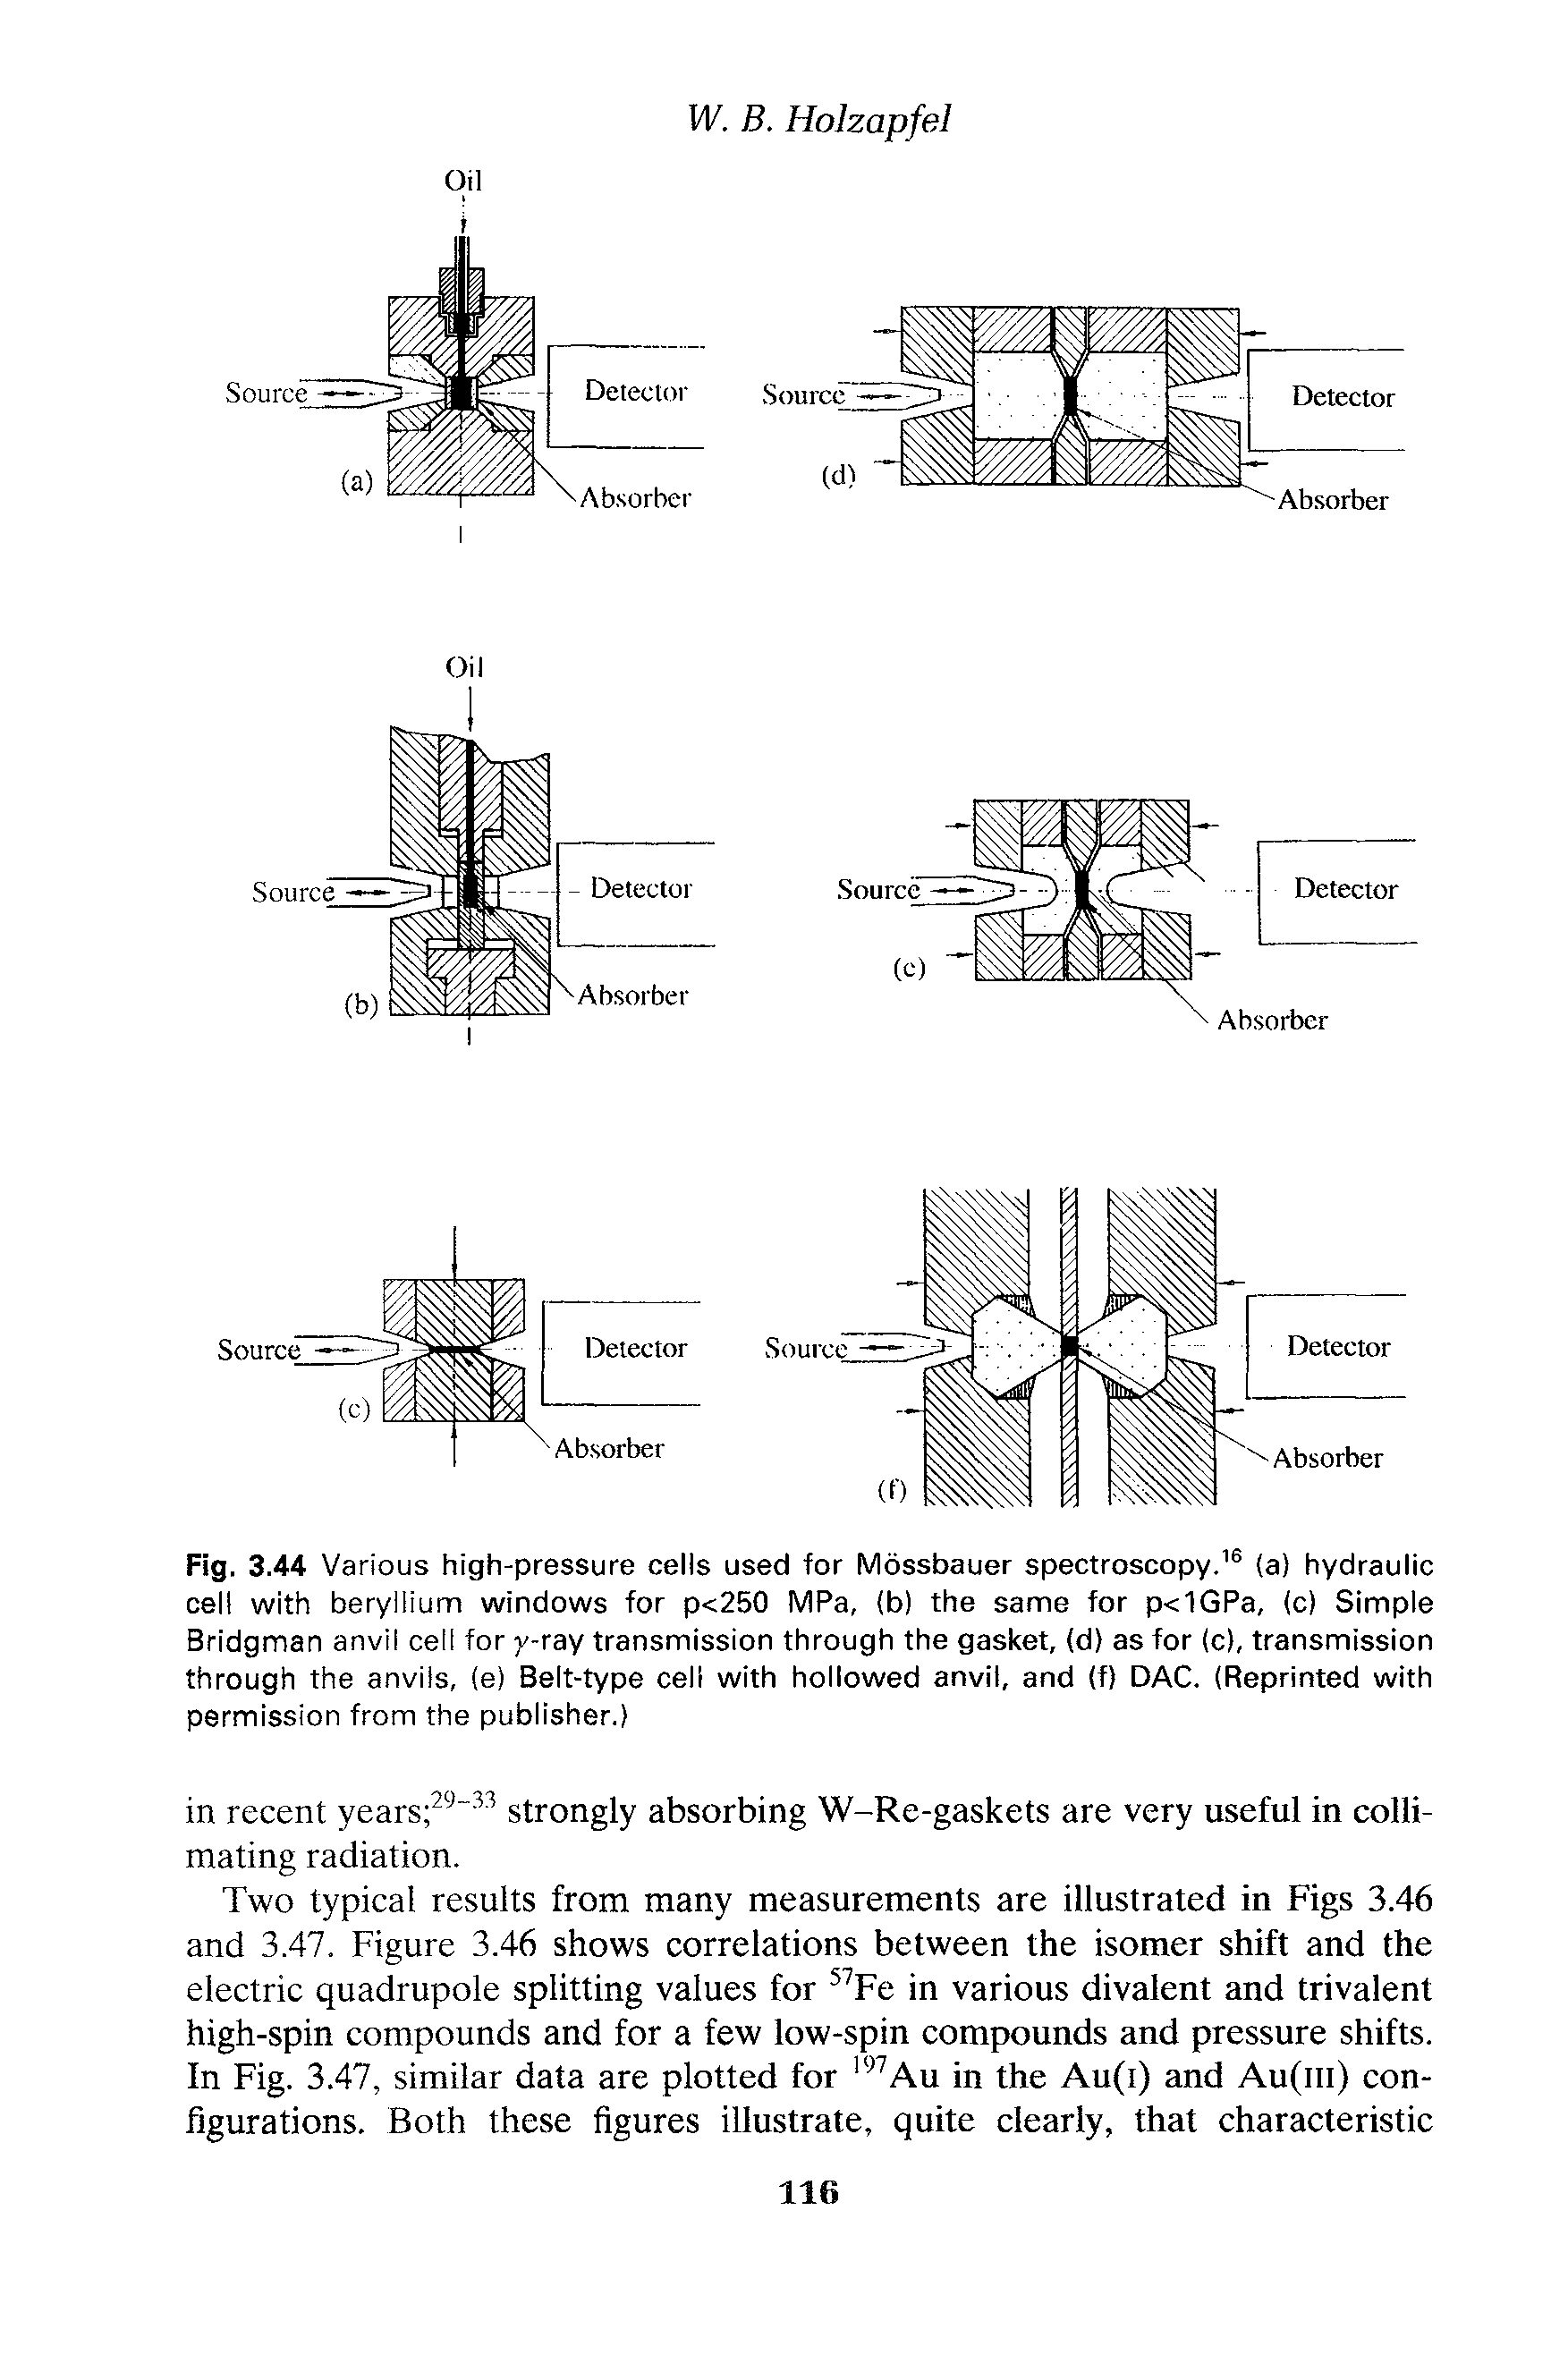 Fig. 3.44 Various high-pressure cells used for Mossbauer spectroscopy. (a) hydraulic cell with beryllium windows for p<250 MPa, (b) the same for p<1GPa, (c) Simple Bridgman anvil cell for y-ray transmission through the gasket, (d) as for (c), transmission through the anvils, (e) Belt-type cell with hollowed anvil, and (f) DAC. (Reprinted with permission from the publisher.)...